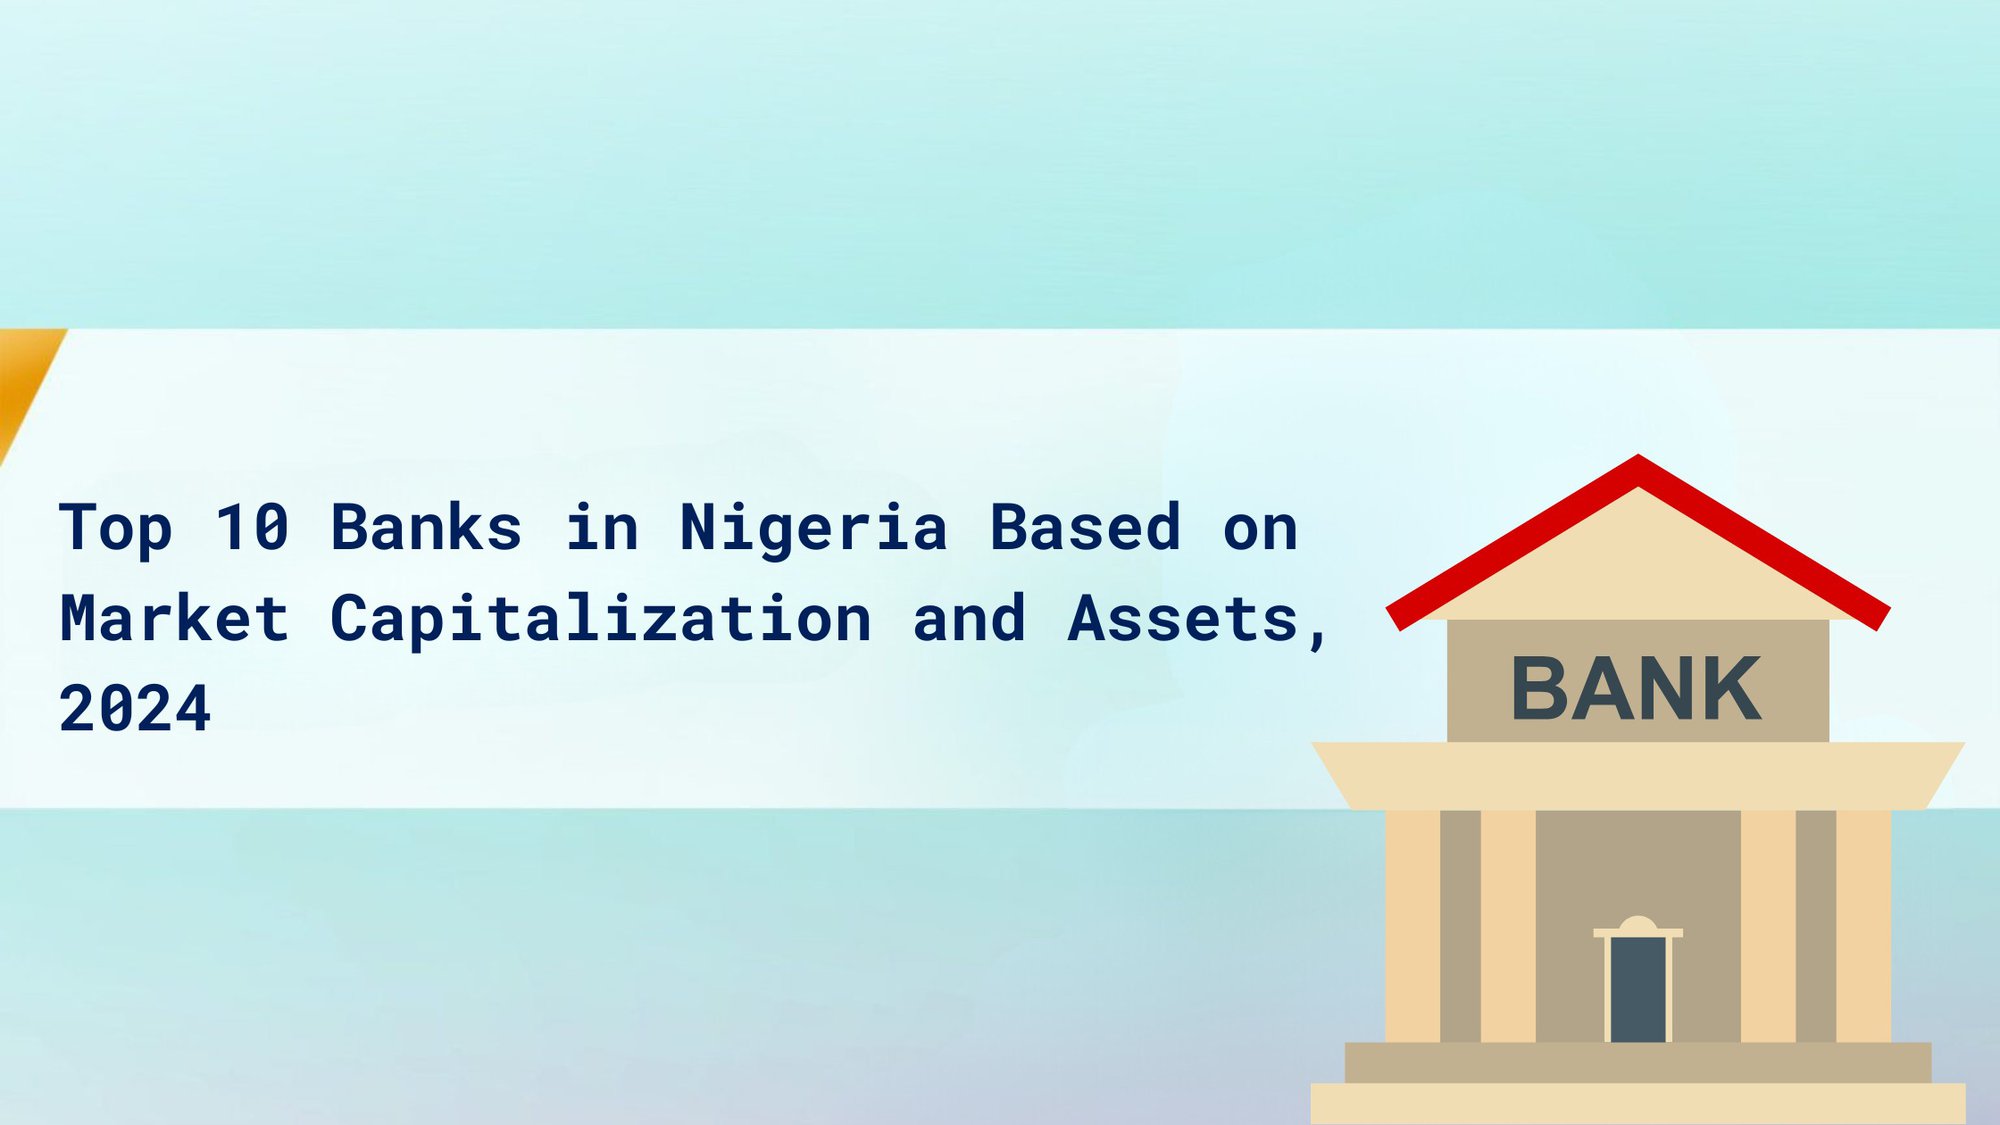 Bar chart or graph depicting the Top 10 Banks in Nigeria for 2024, ranked by market capitalization and total assets